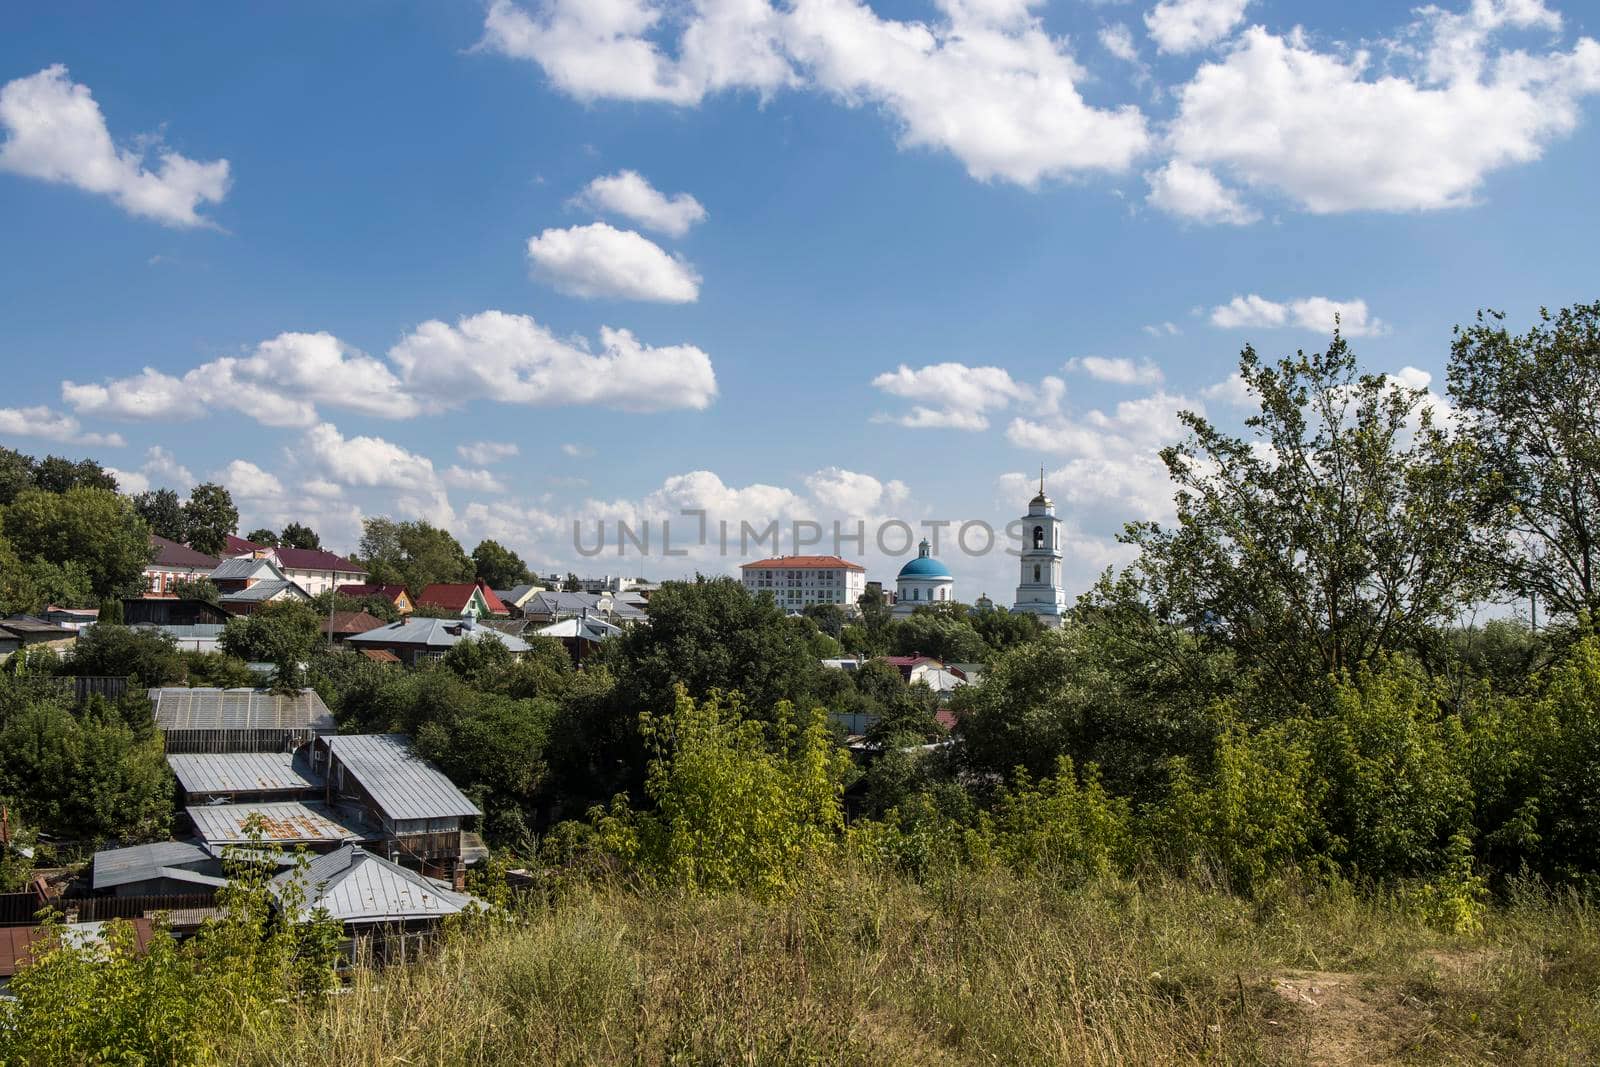 Serpukhov, Russia - June 18, 2021: Aerial view of the ancient Orthodox Christian monastery, located among the houses and nature in the city